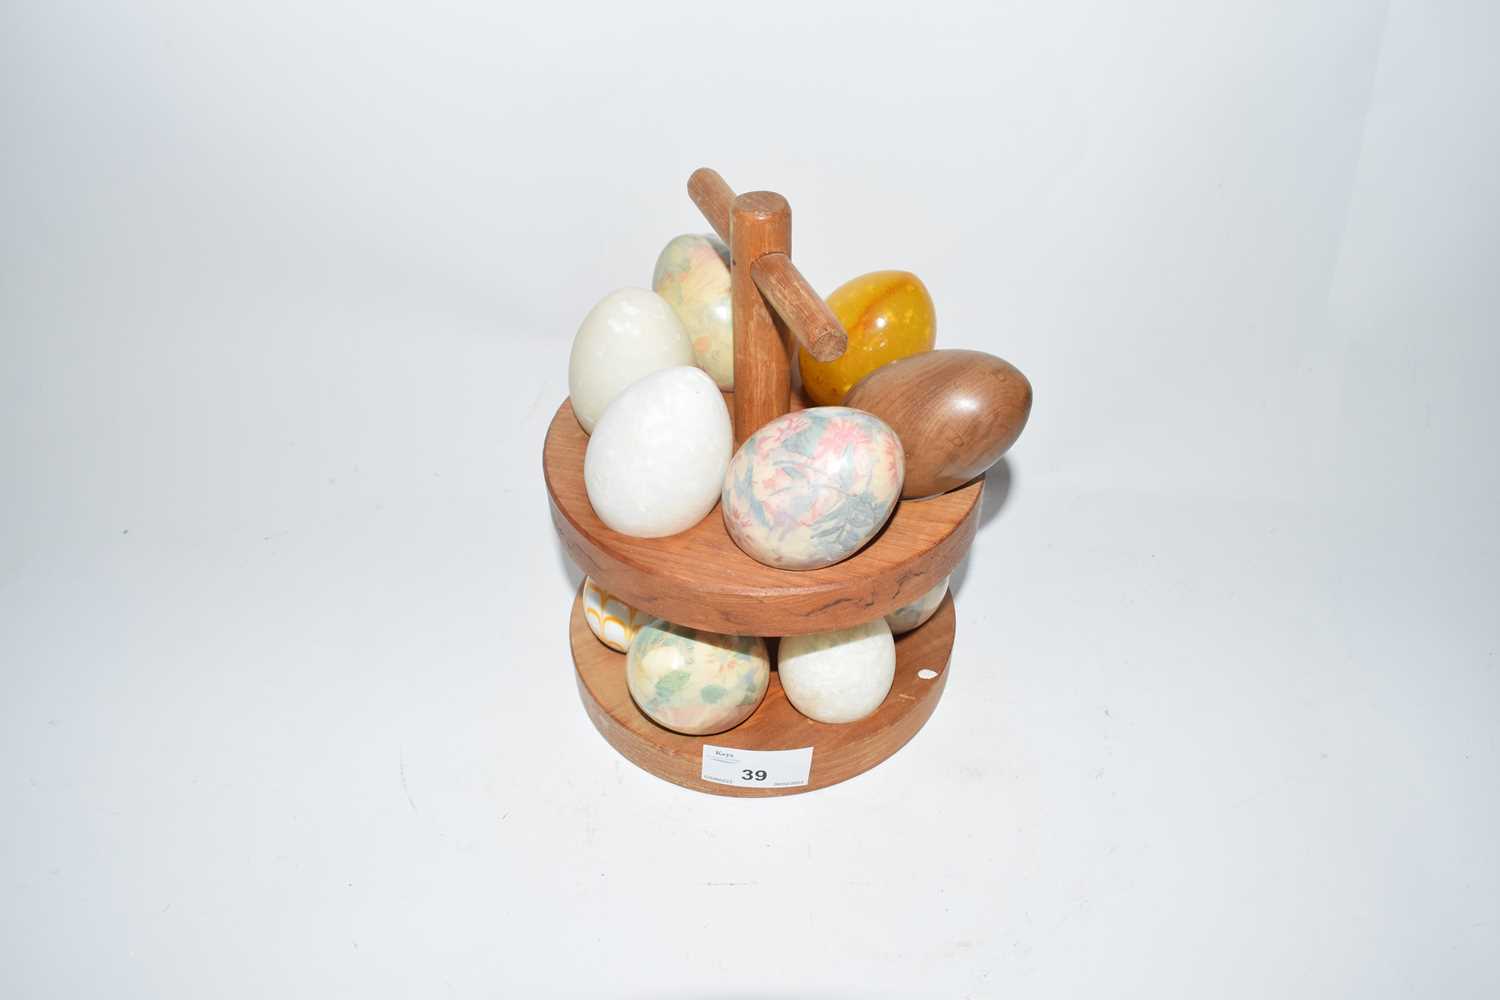 Collection of various polished stone eggs